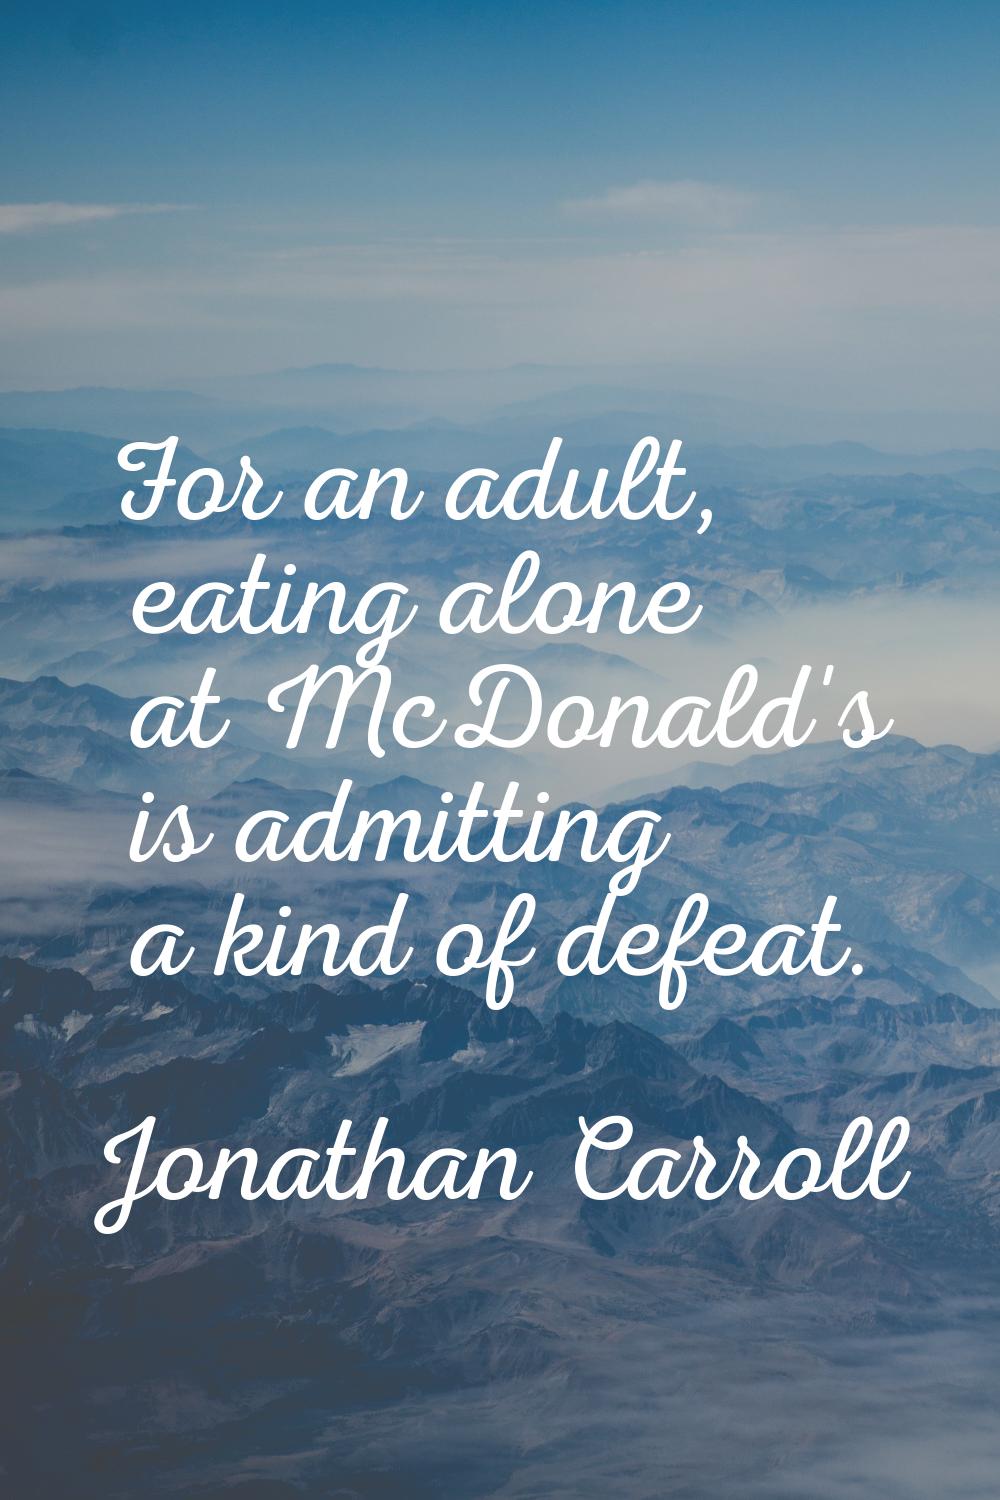 For an adult, eating alone at McDonald's is admitting a kind of defeat.